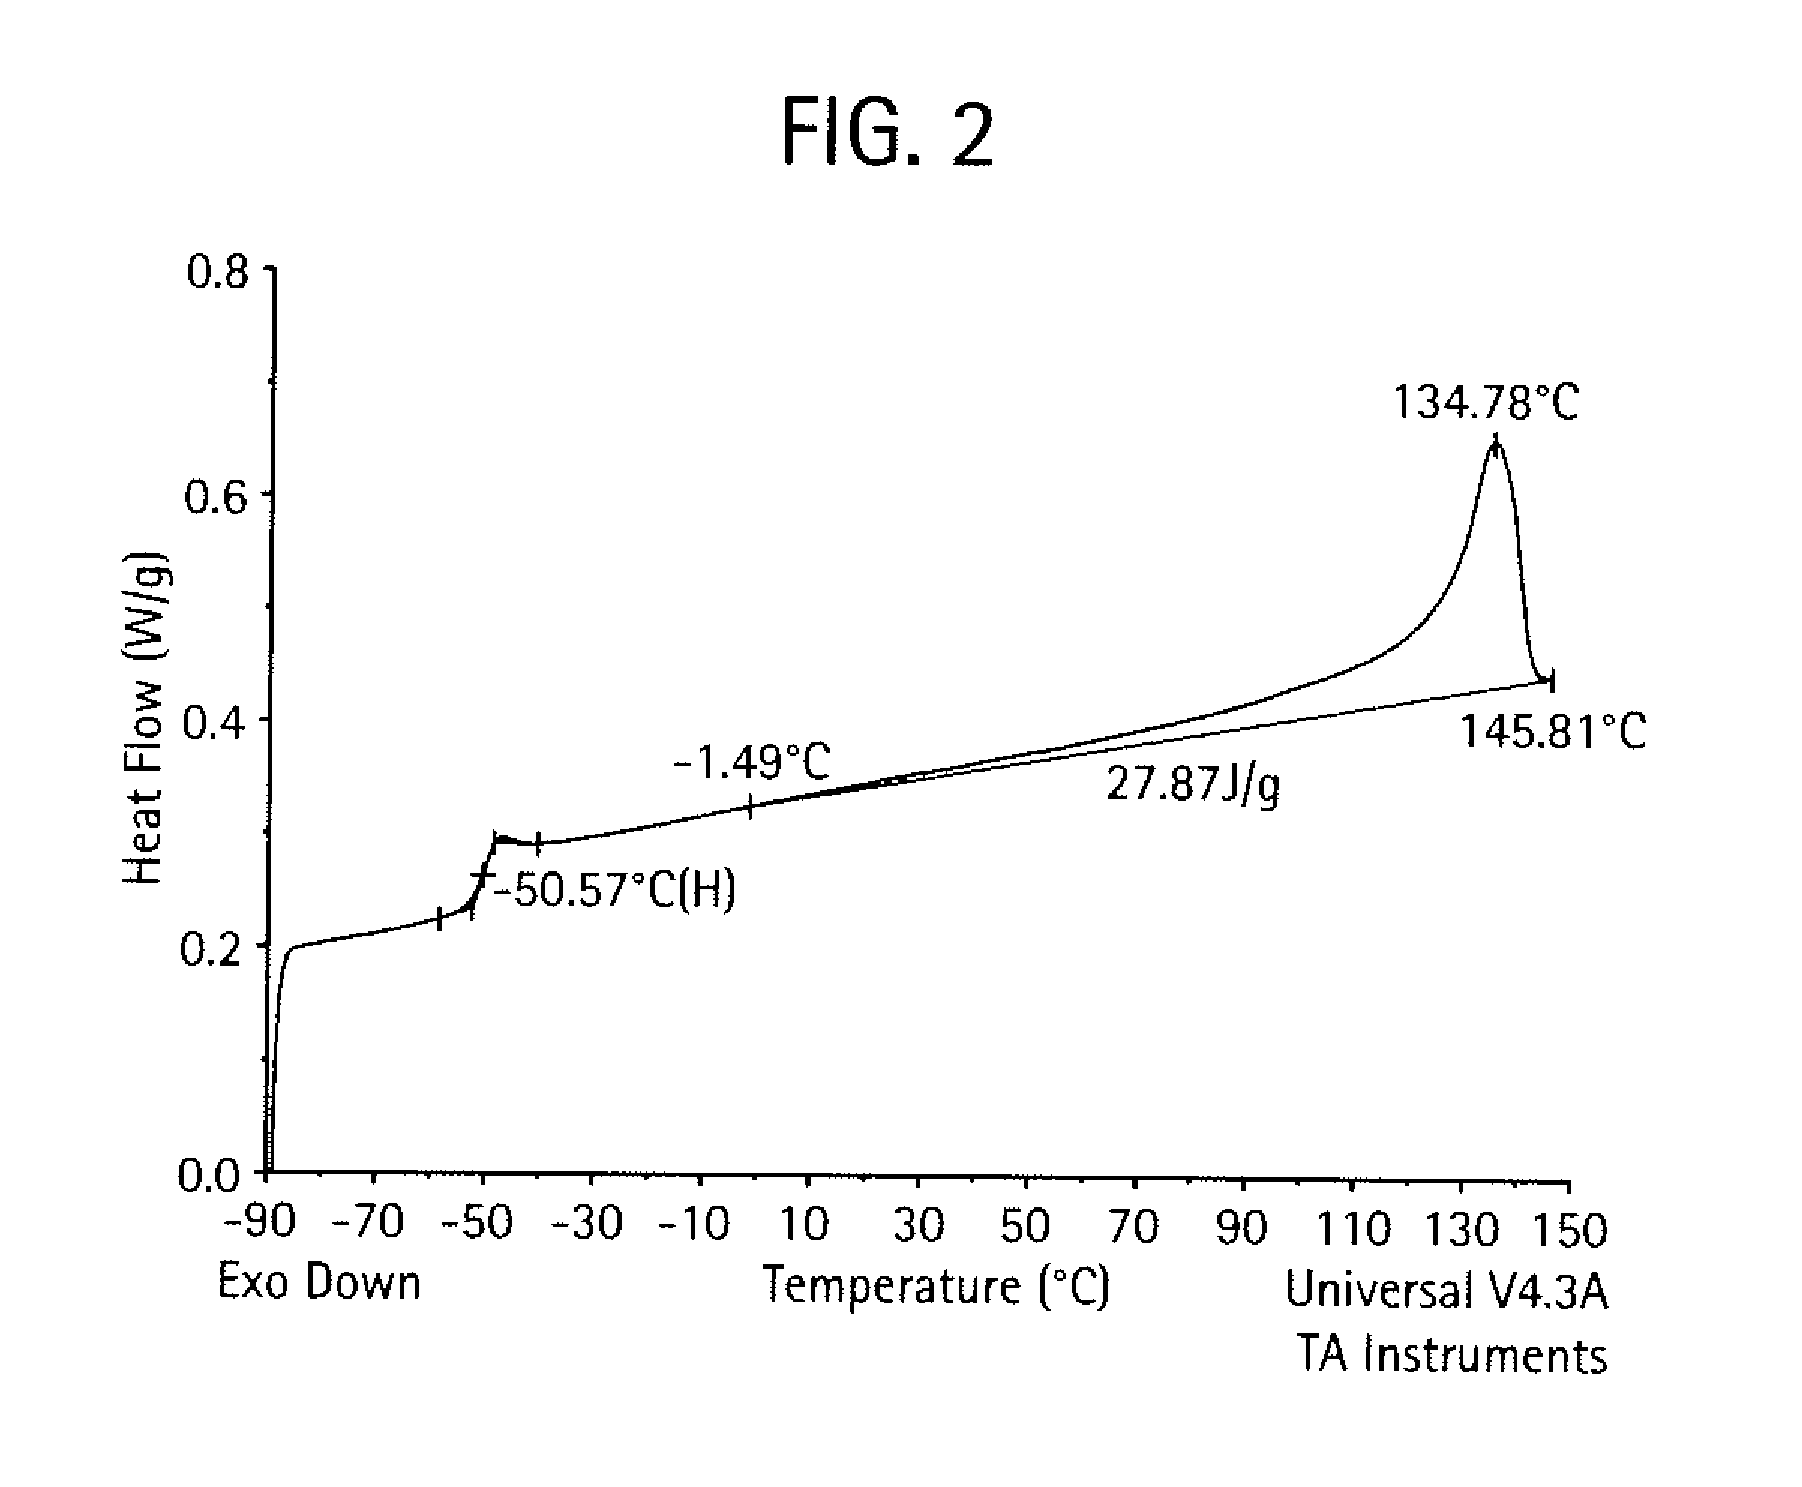 Block composites and impact modified compositions